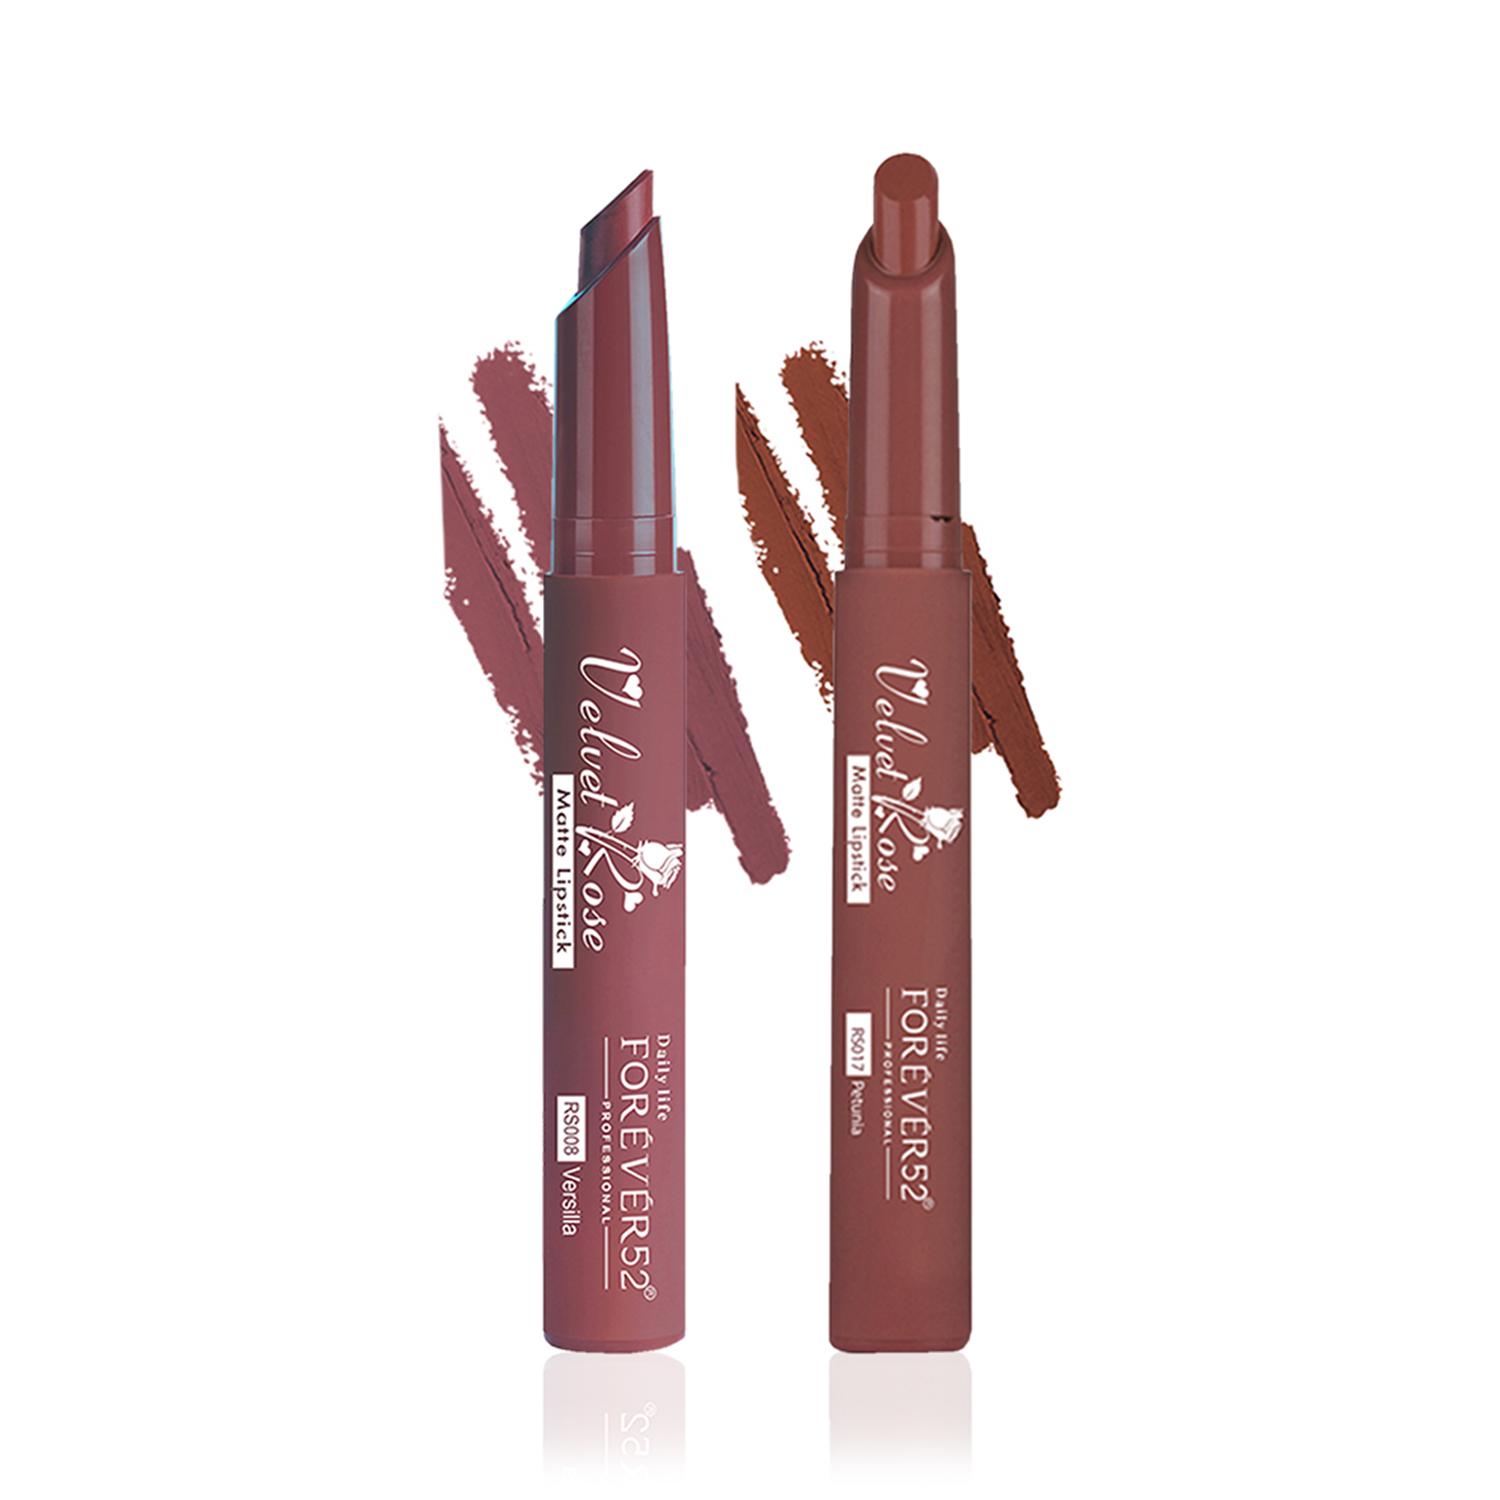 Daily Life Forever52 | Daily Life Forever52 Velvet Rose Matte Lipstick Set of 2 Crayons Combo (Versilla,Petunia)